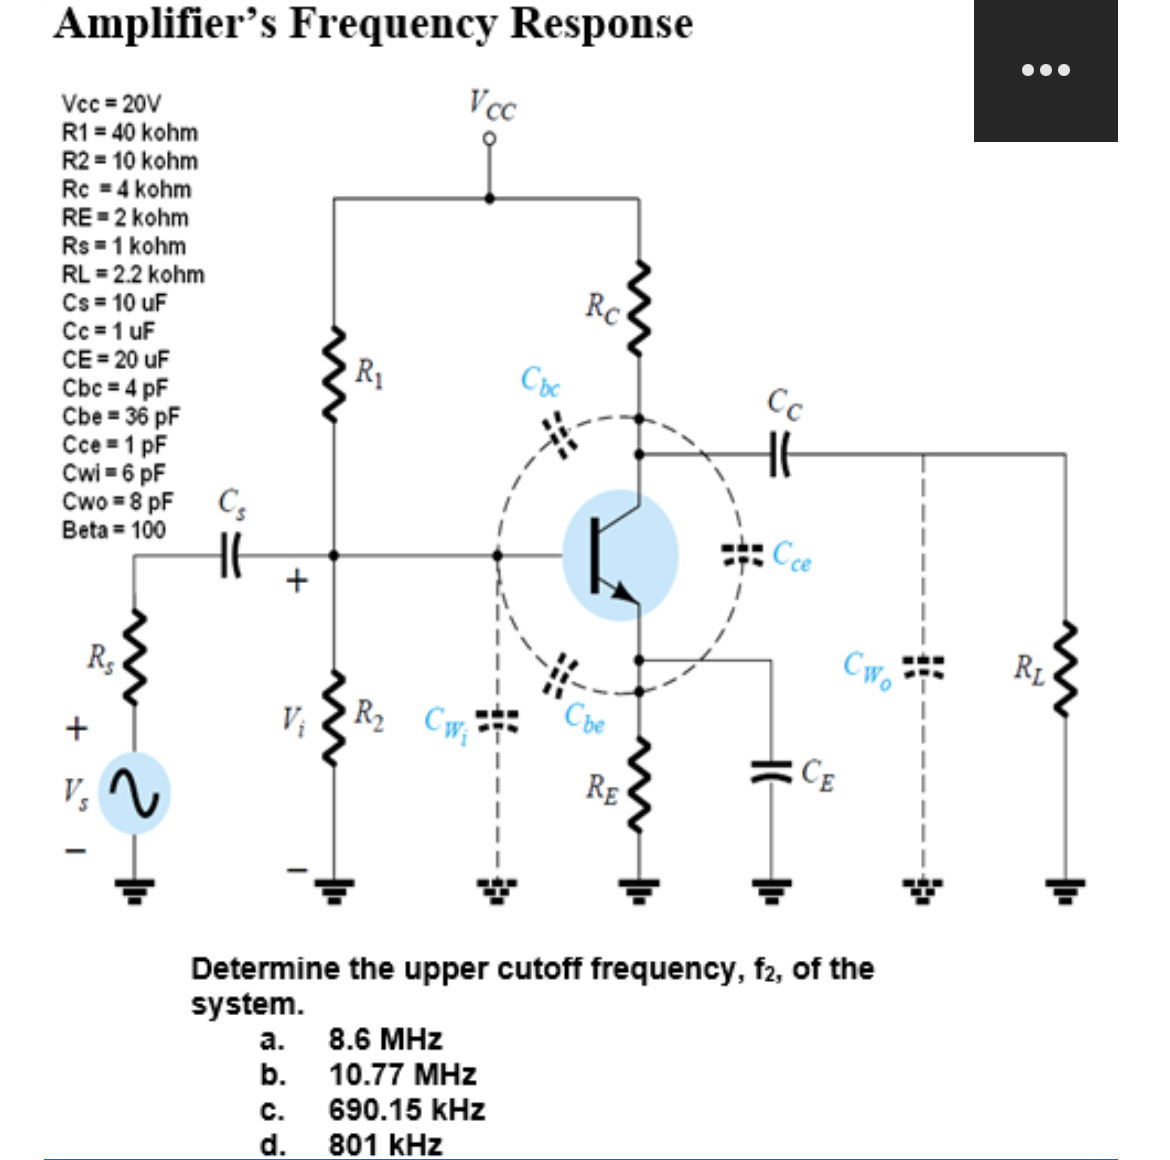 Amplifier's Frequency Response
Vcc=20V
R1 = 40 kohm
R2 = 10 kohm
Rc = 4 kohm
RE=2 kohm
Rs = 1 kohm
RL = 2.2 kohm
Cs = 10 uF
Cc = 1 uF
CE = 20 uF
Cbc = 4 pF
Cbe = 36 pF
Cce = 1 pF
Cwi=6 pF
Cwo=8 pF
Beta = 100
+
Rs
Vs
Cs
H6
+
R₁
Vcc
R₂ Cw₁
a.
8.6 MHz
b. 10.77 MHz
Cbc
C. 690.15 kHz
d. 801 kHz
Rc
Che
RE
Cc
Cce
CE
Determine the upper cutoff frequency, f2, of the
system.
CWo
●●●
RL